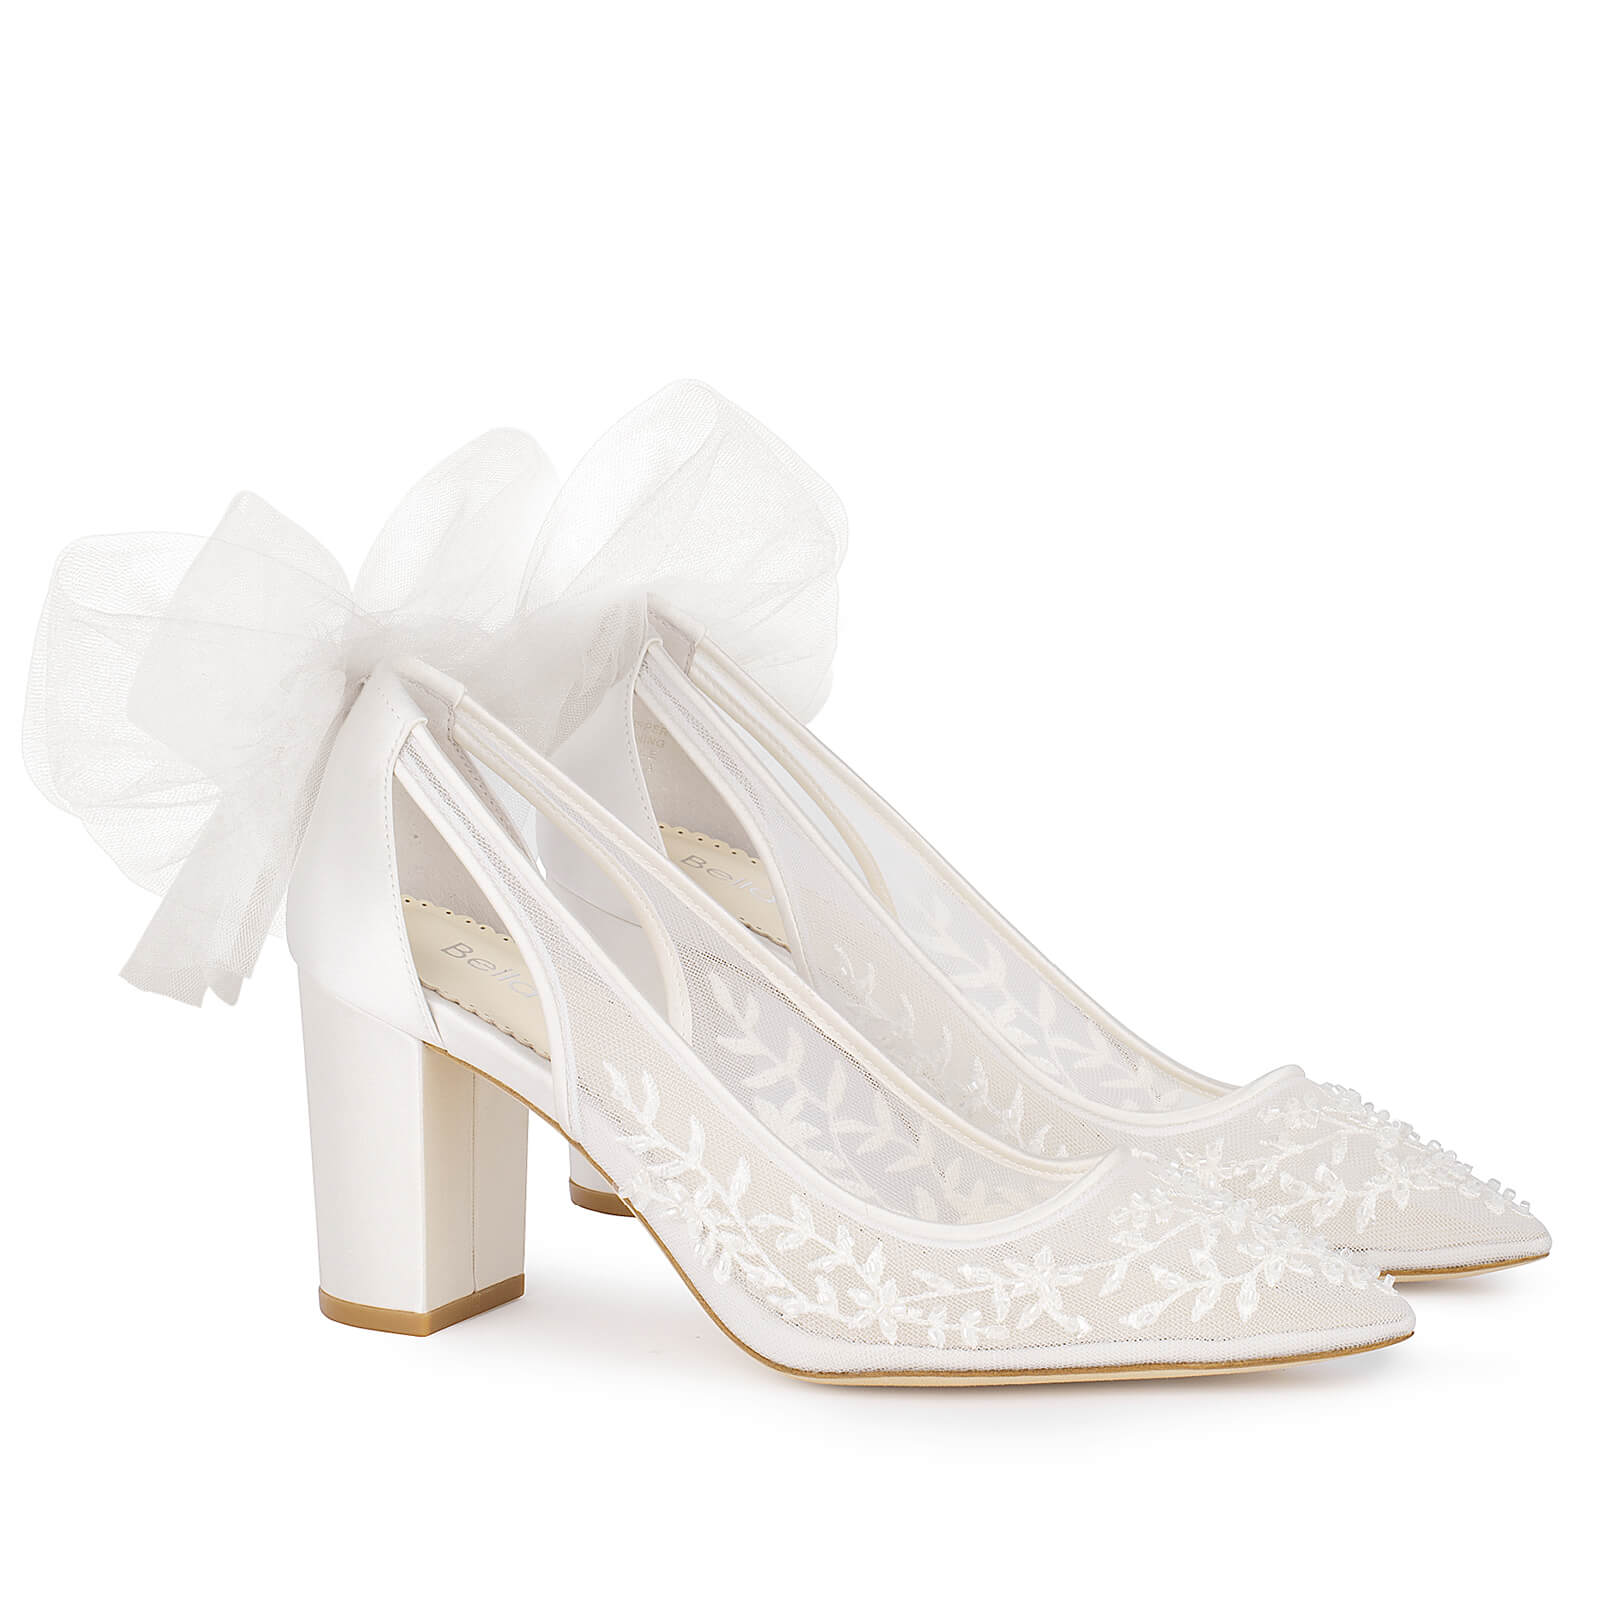 HOLLY Slingback Platform in White Nappa | Russell & Bromley